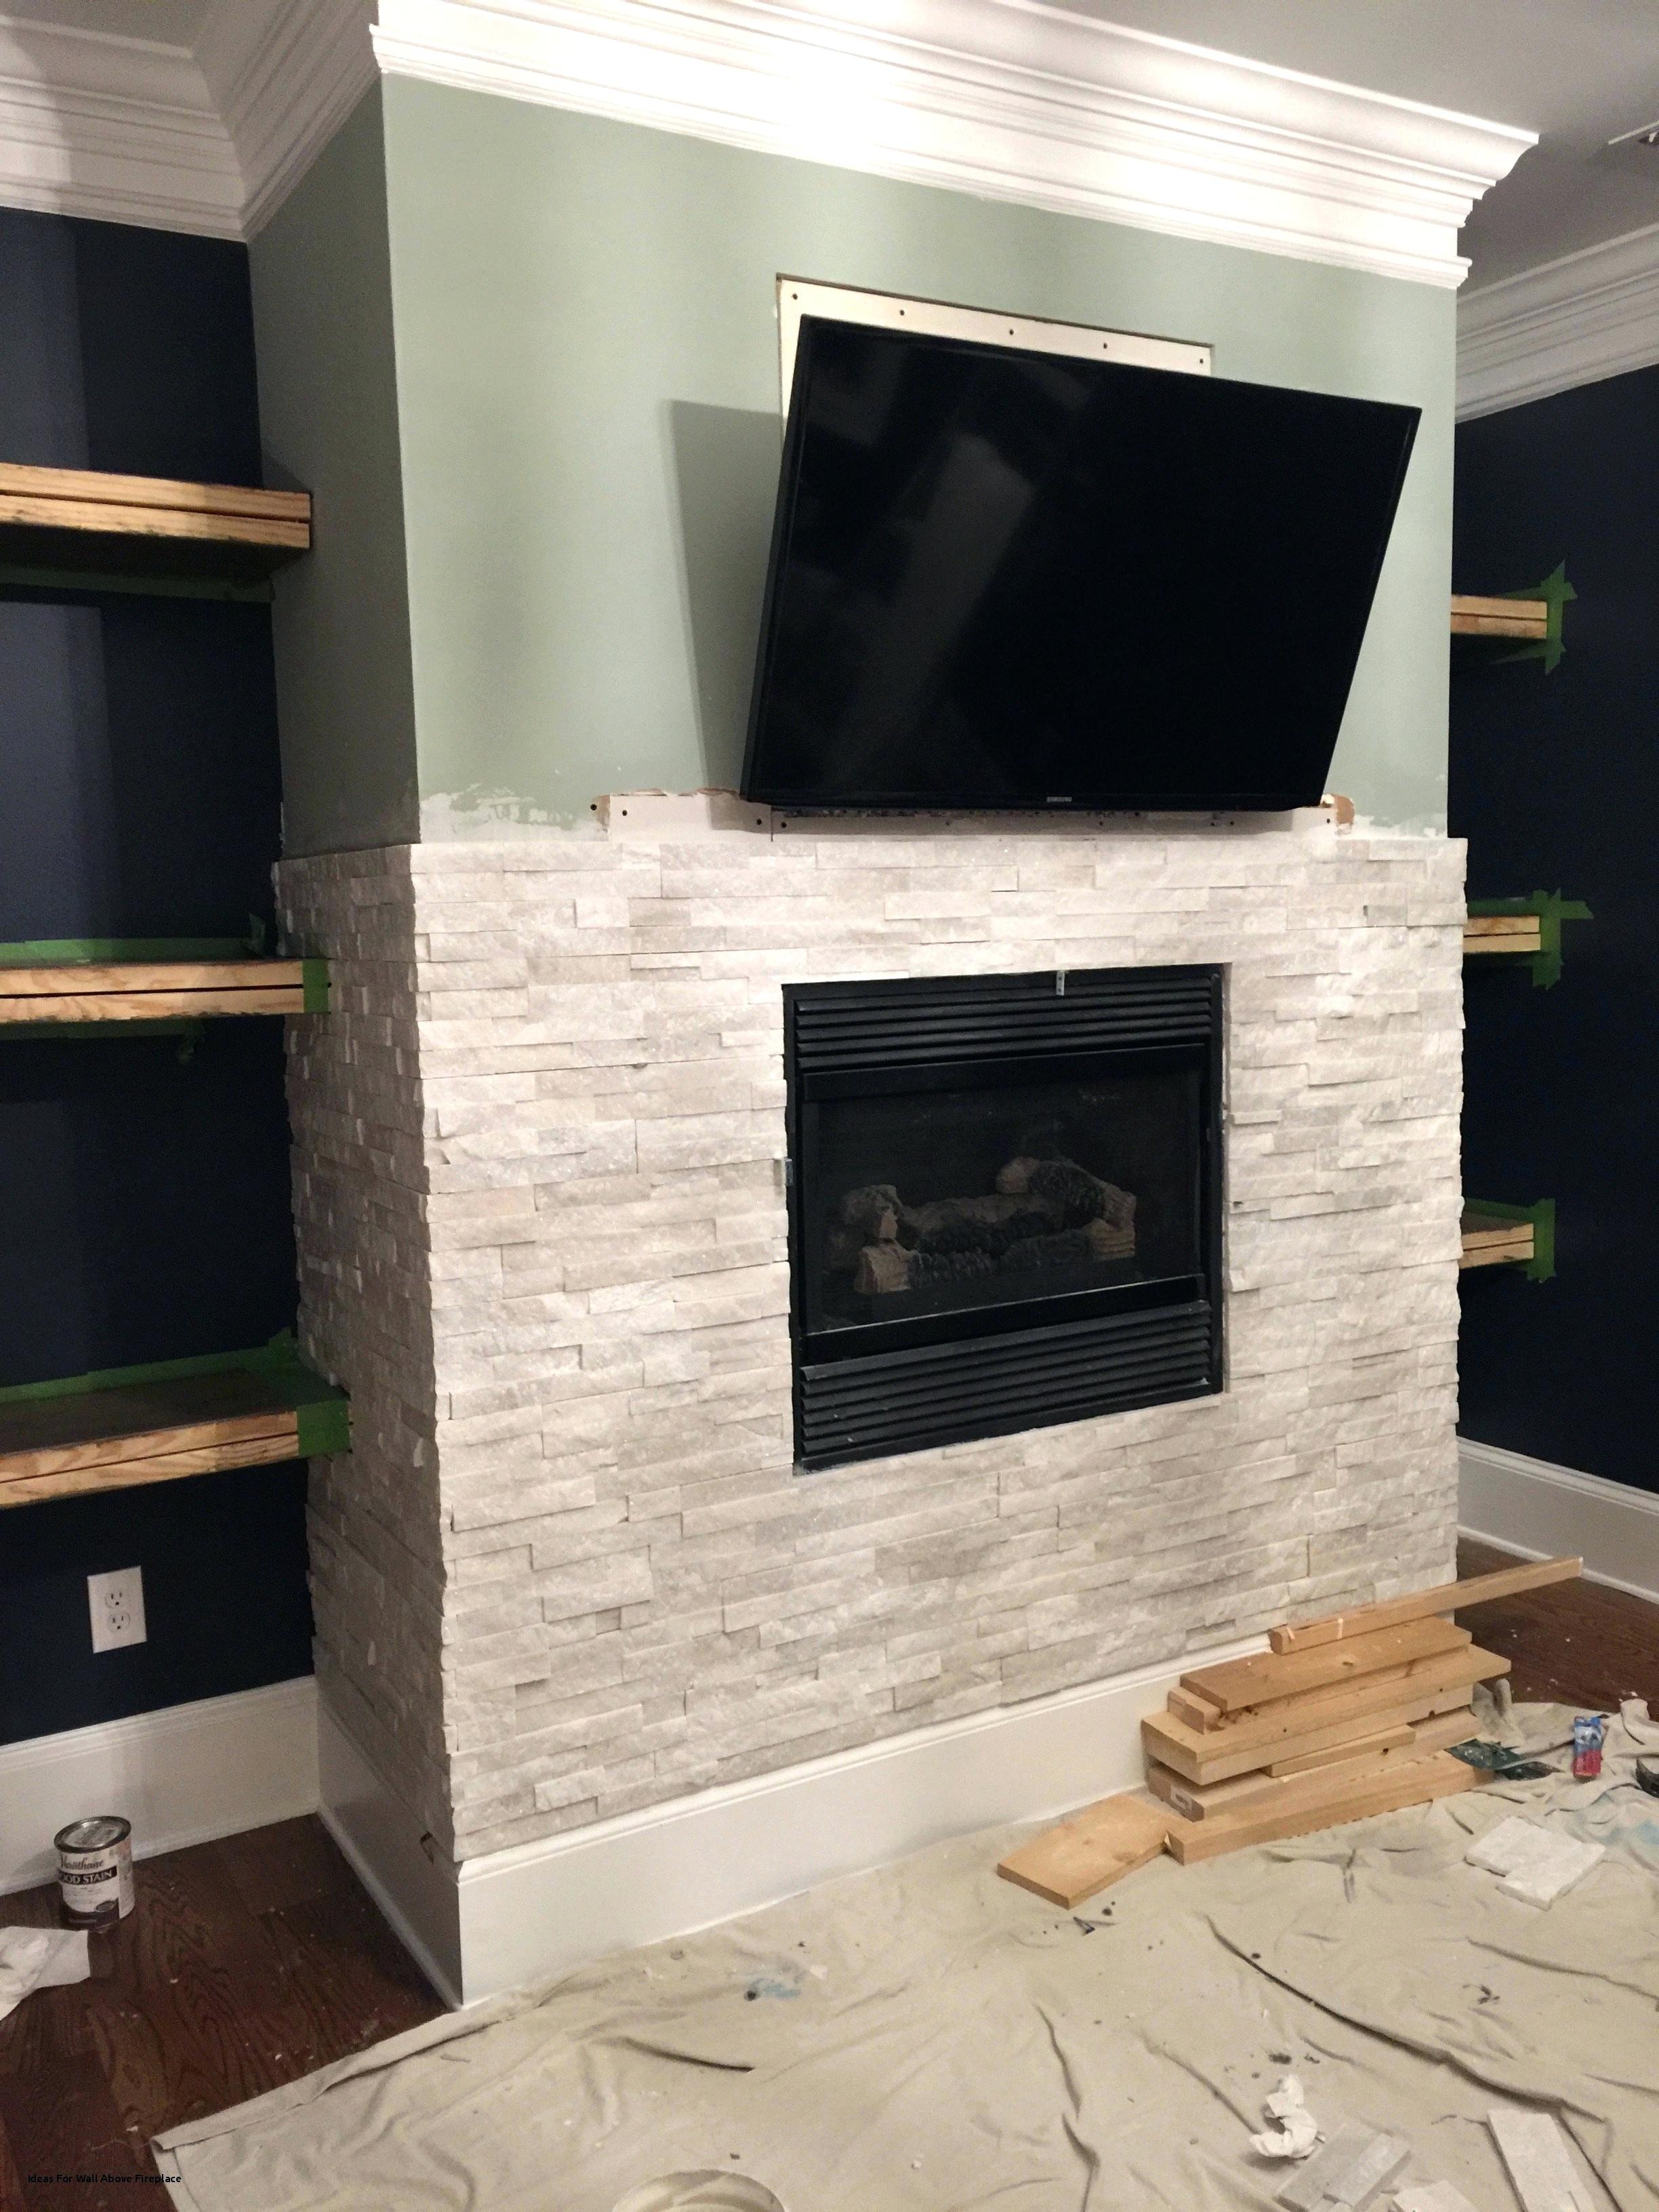 crown molding and tv over fireplace with stone fireplace ideas also shelves plus hardwood flooring for living room renovation ideas ledgestone veneer fireplace fieldstone fireplace cost fireplace mant